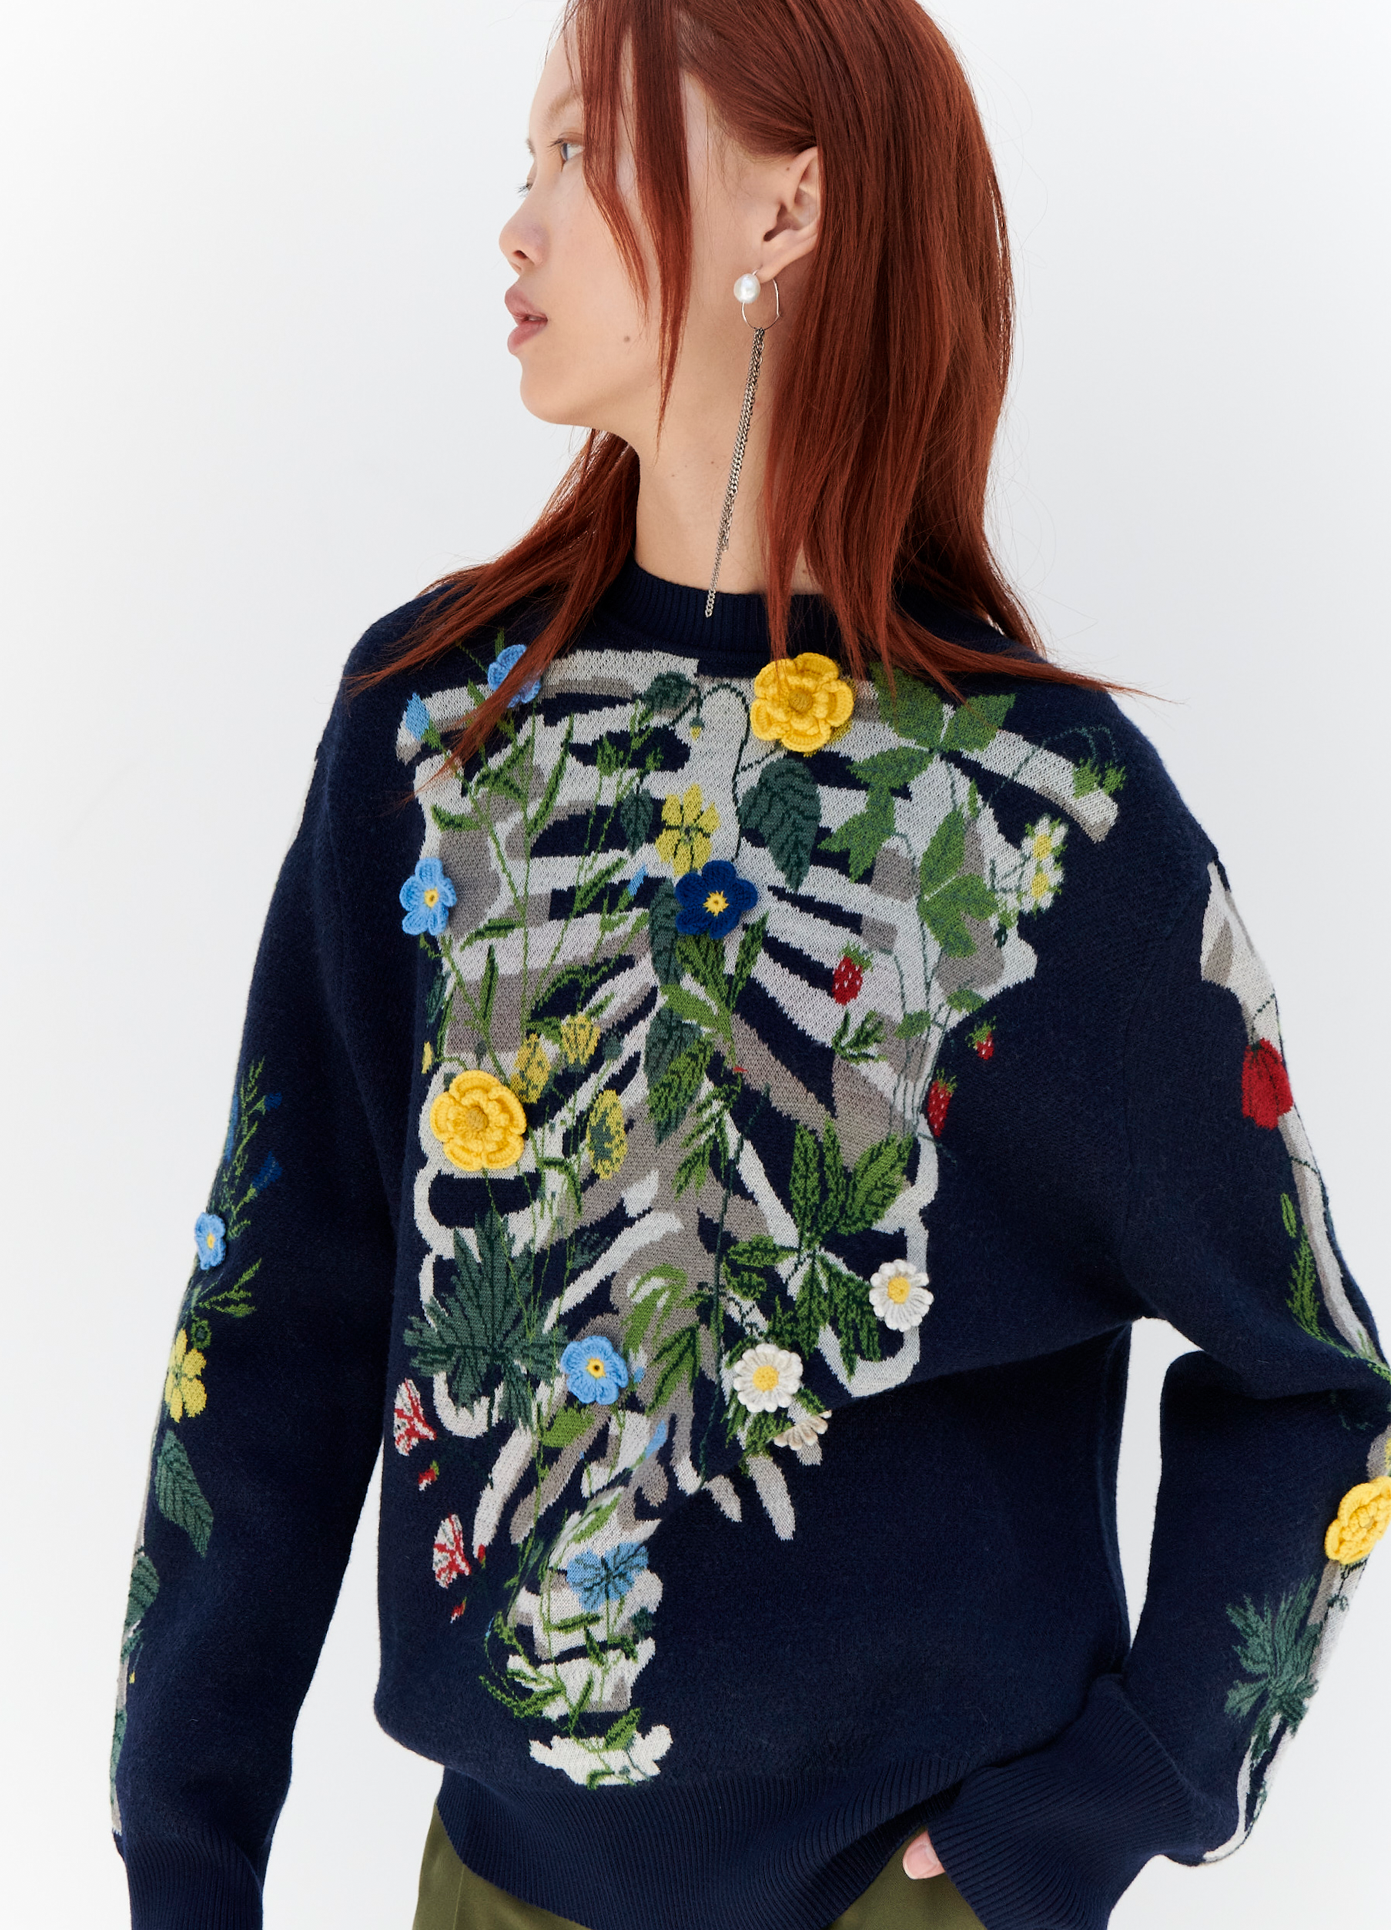 MONSE Floral Skeleton Sweater in Navy on model front view